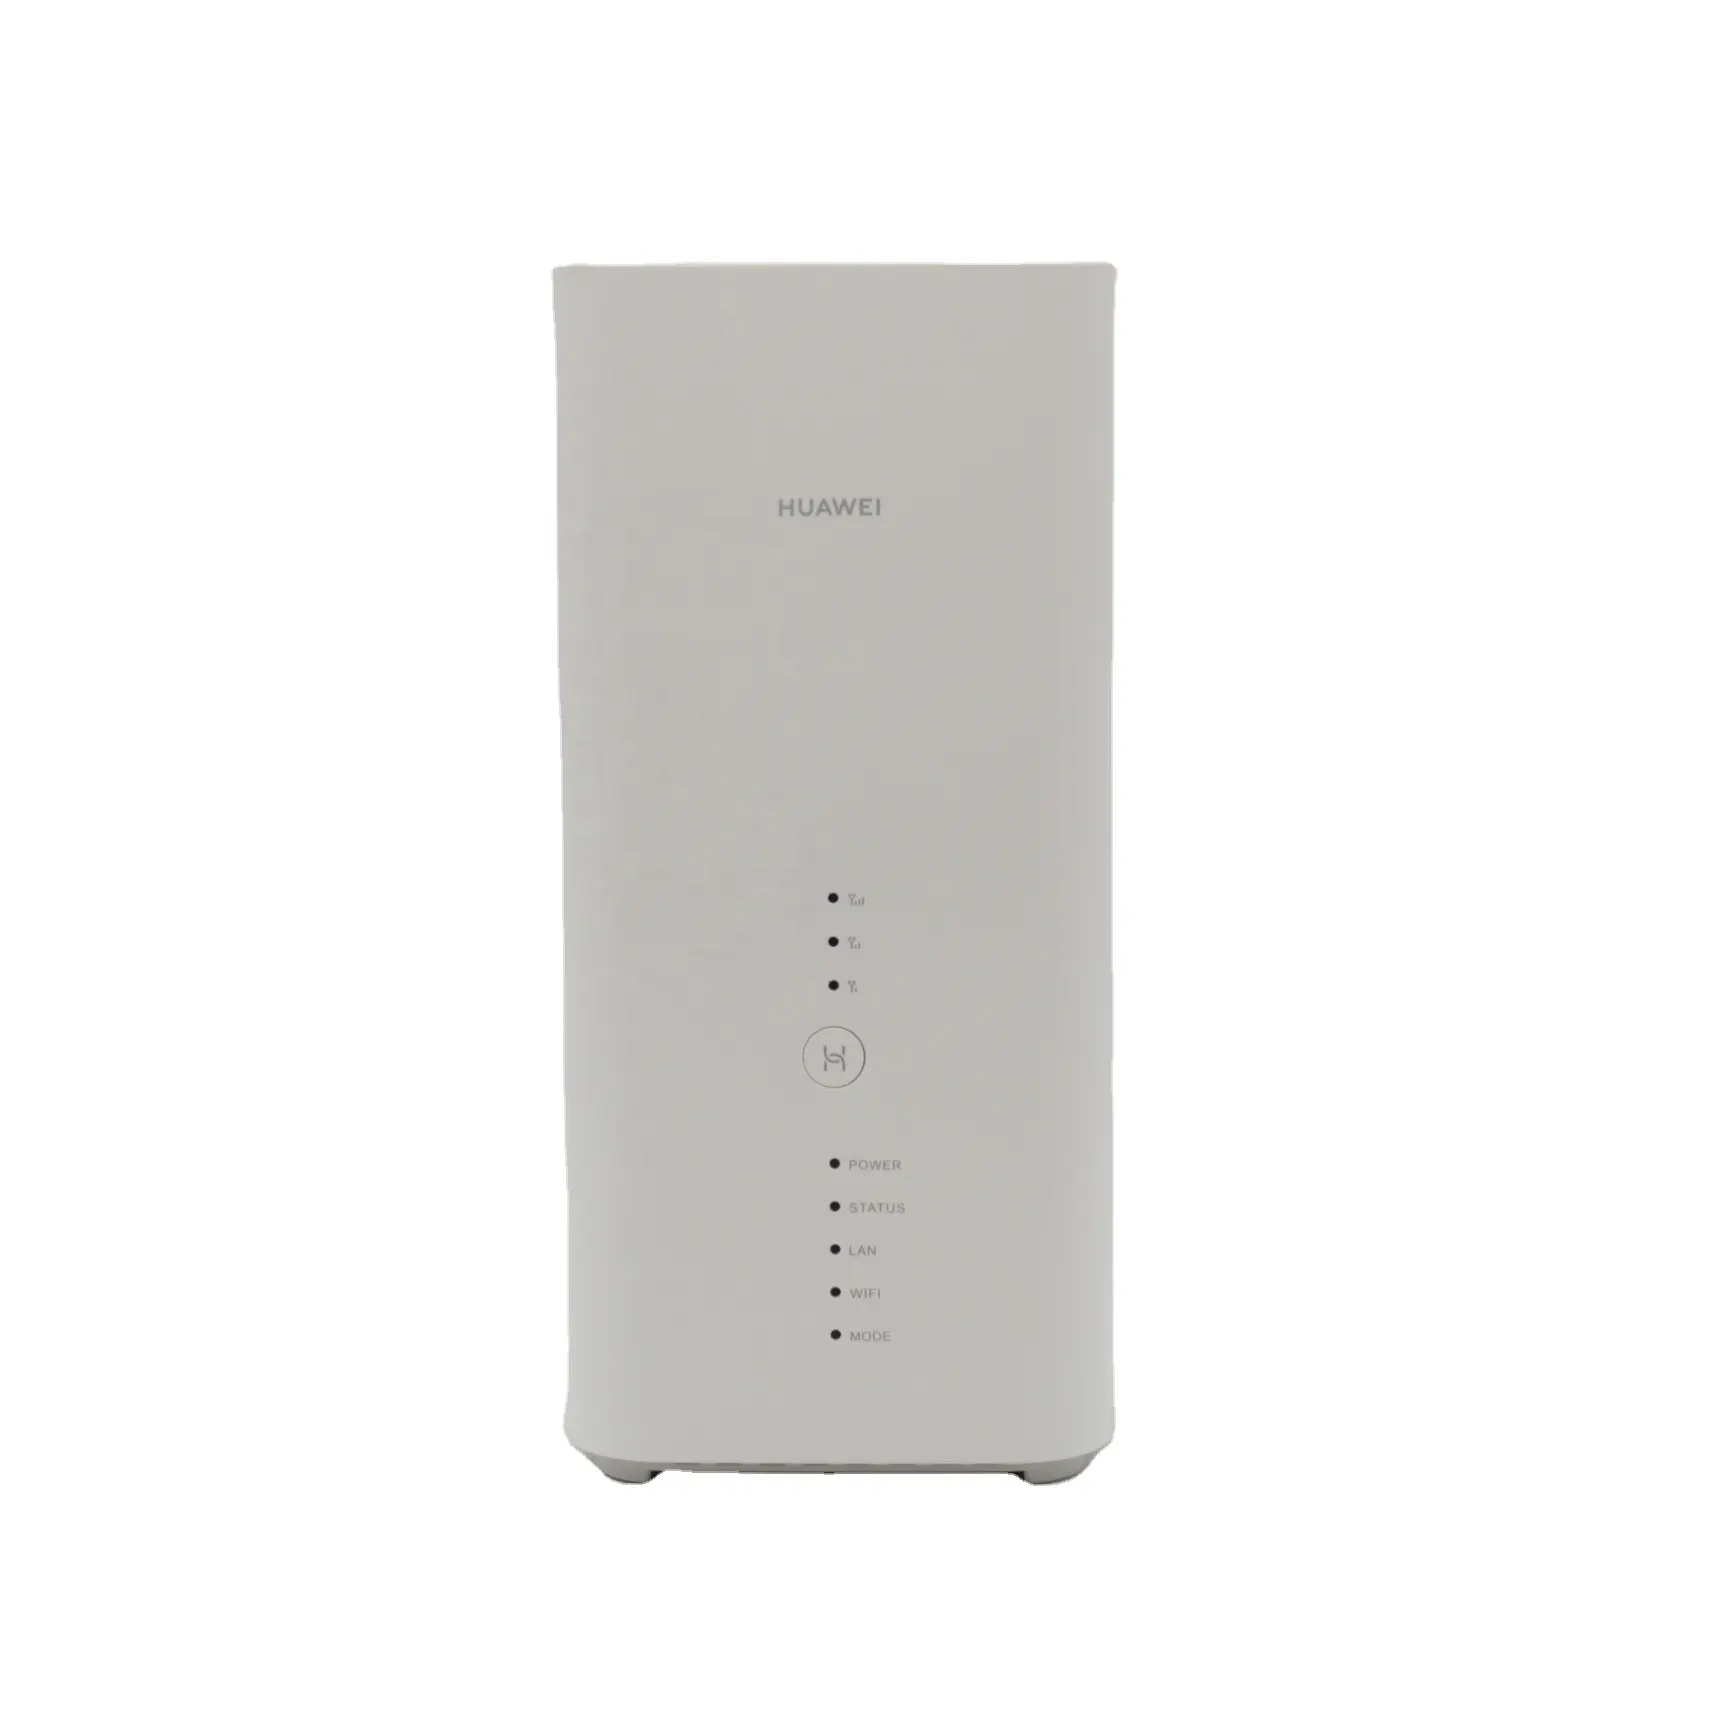 4G LTE CPE Router B818 4G CPE Pro LTE CPE Wireless Router Original for Huawei B818-263 White Fast Speed 3 Months 2.4G & 5G B2368